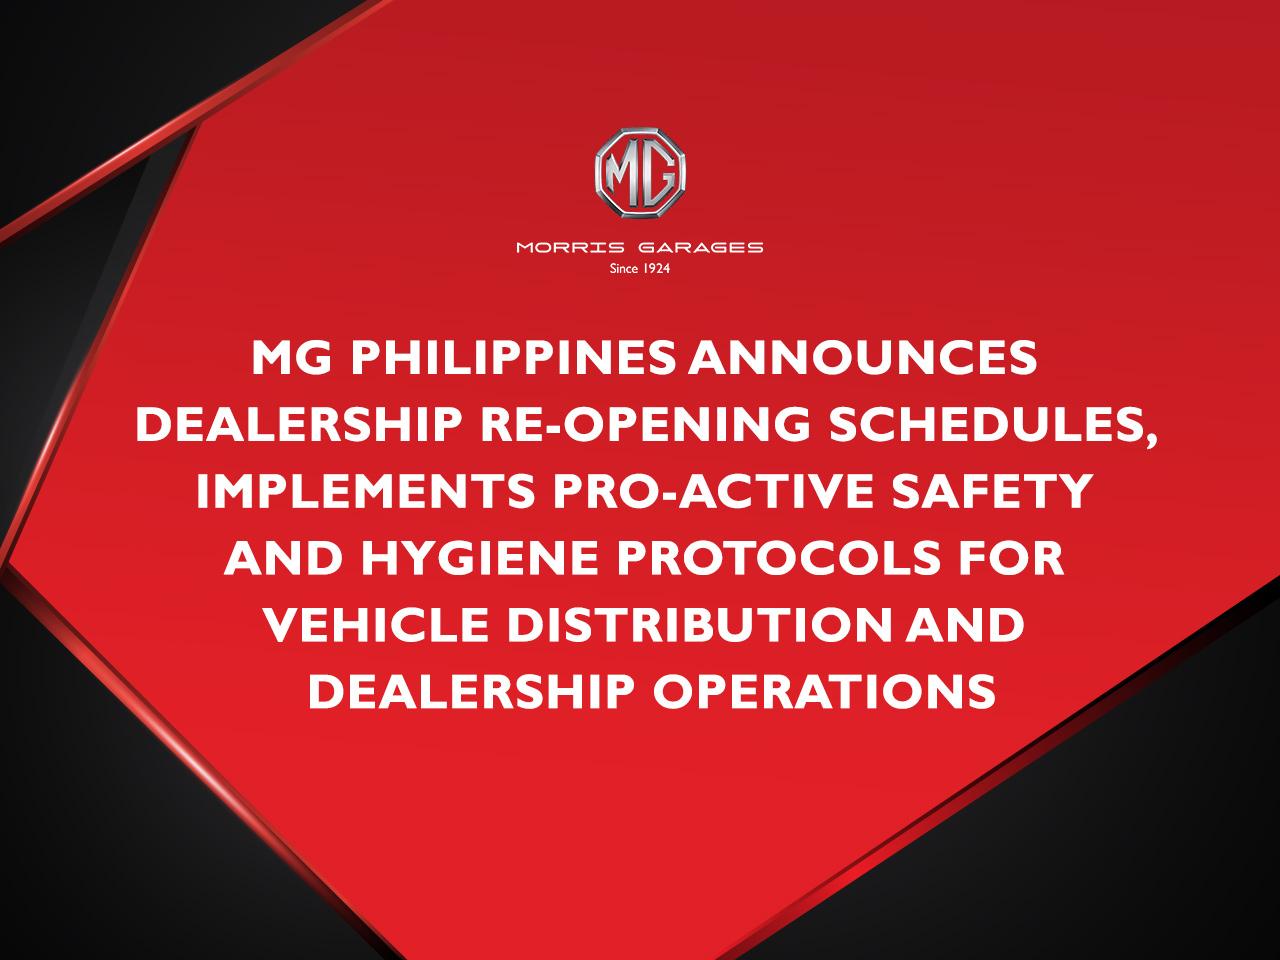 MG PHILIPPINES ANNOUNCES DEALERSHIP RE-OPENING SCHEDULES, IMPLEMENTS PRO-ACTIVE SAFETY AND HYGIENE PROTOCOLS FOR VEHICLE DISTRIBUTION AND DEALERSHIP OPERATIONS